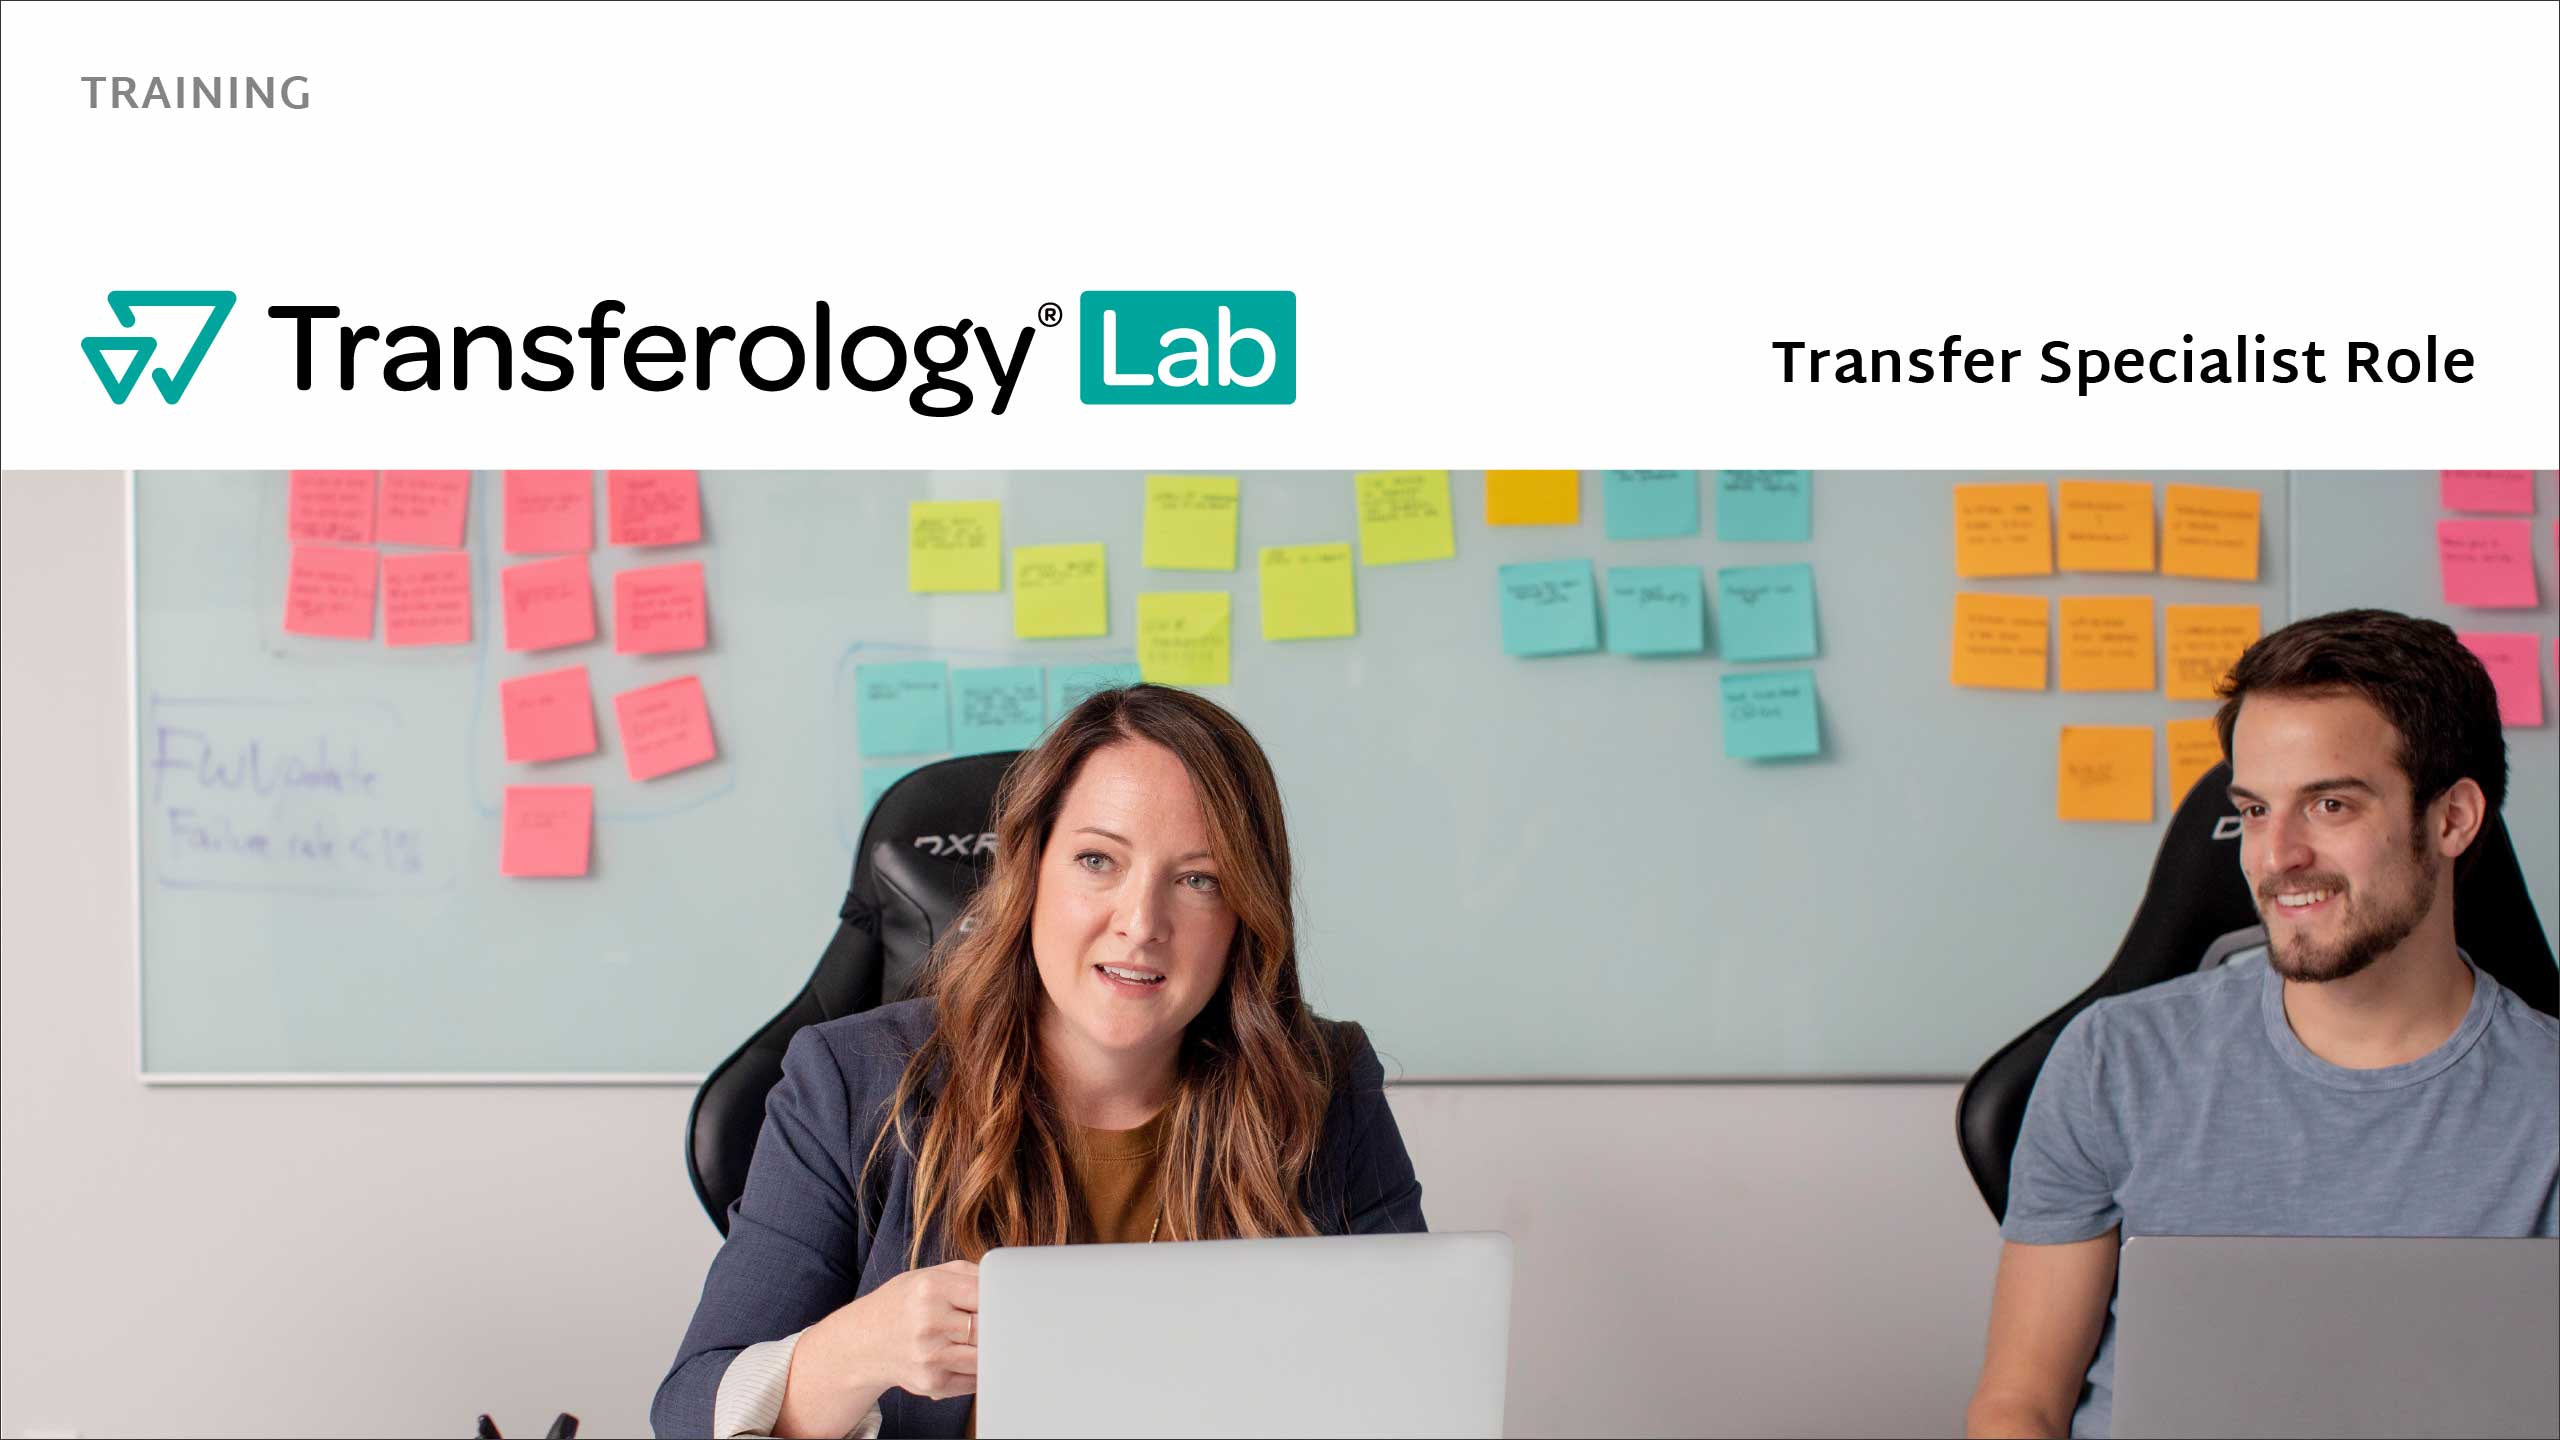 Transferology Training for Transfer Specialist Role